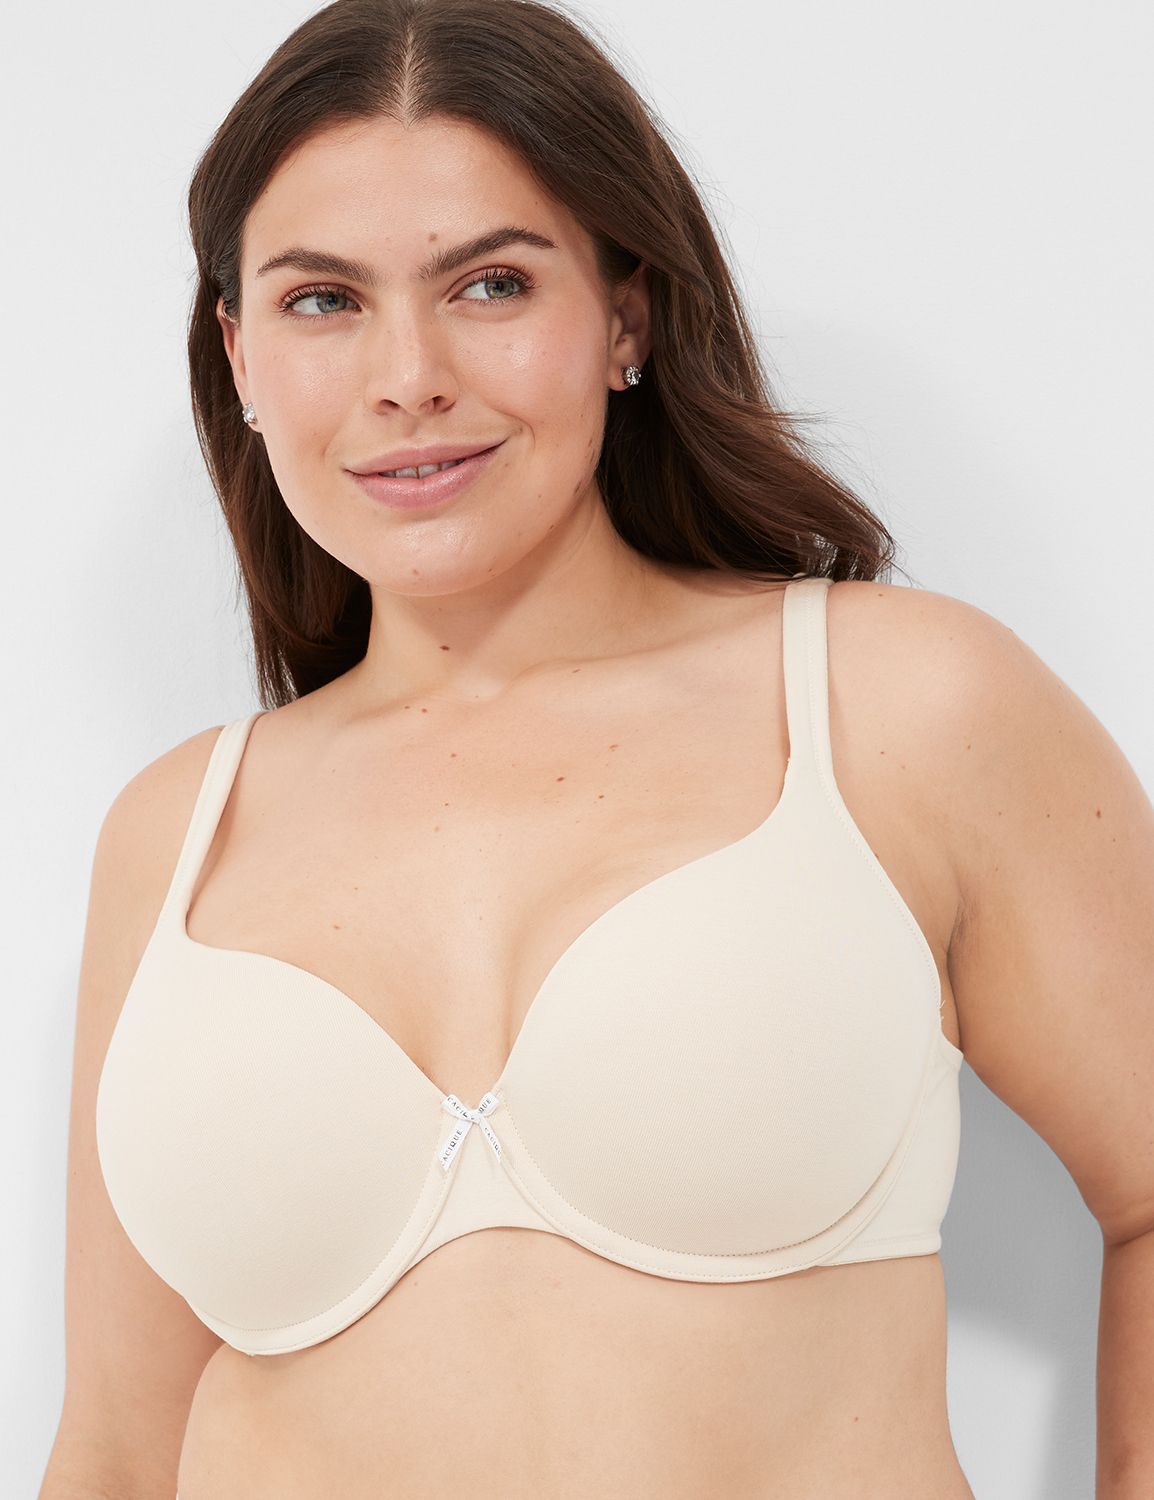 Cacique T-Shirt Bra 46D White Padded Underwire Adjustable Straps